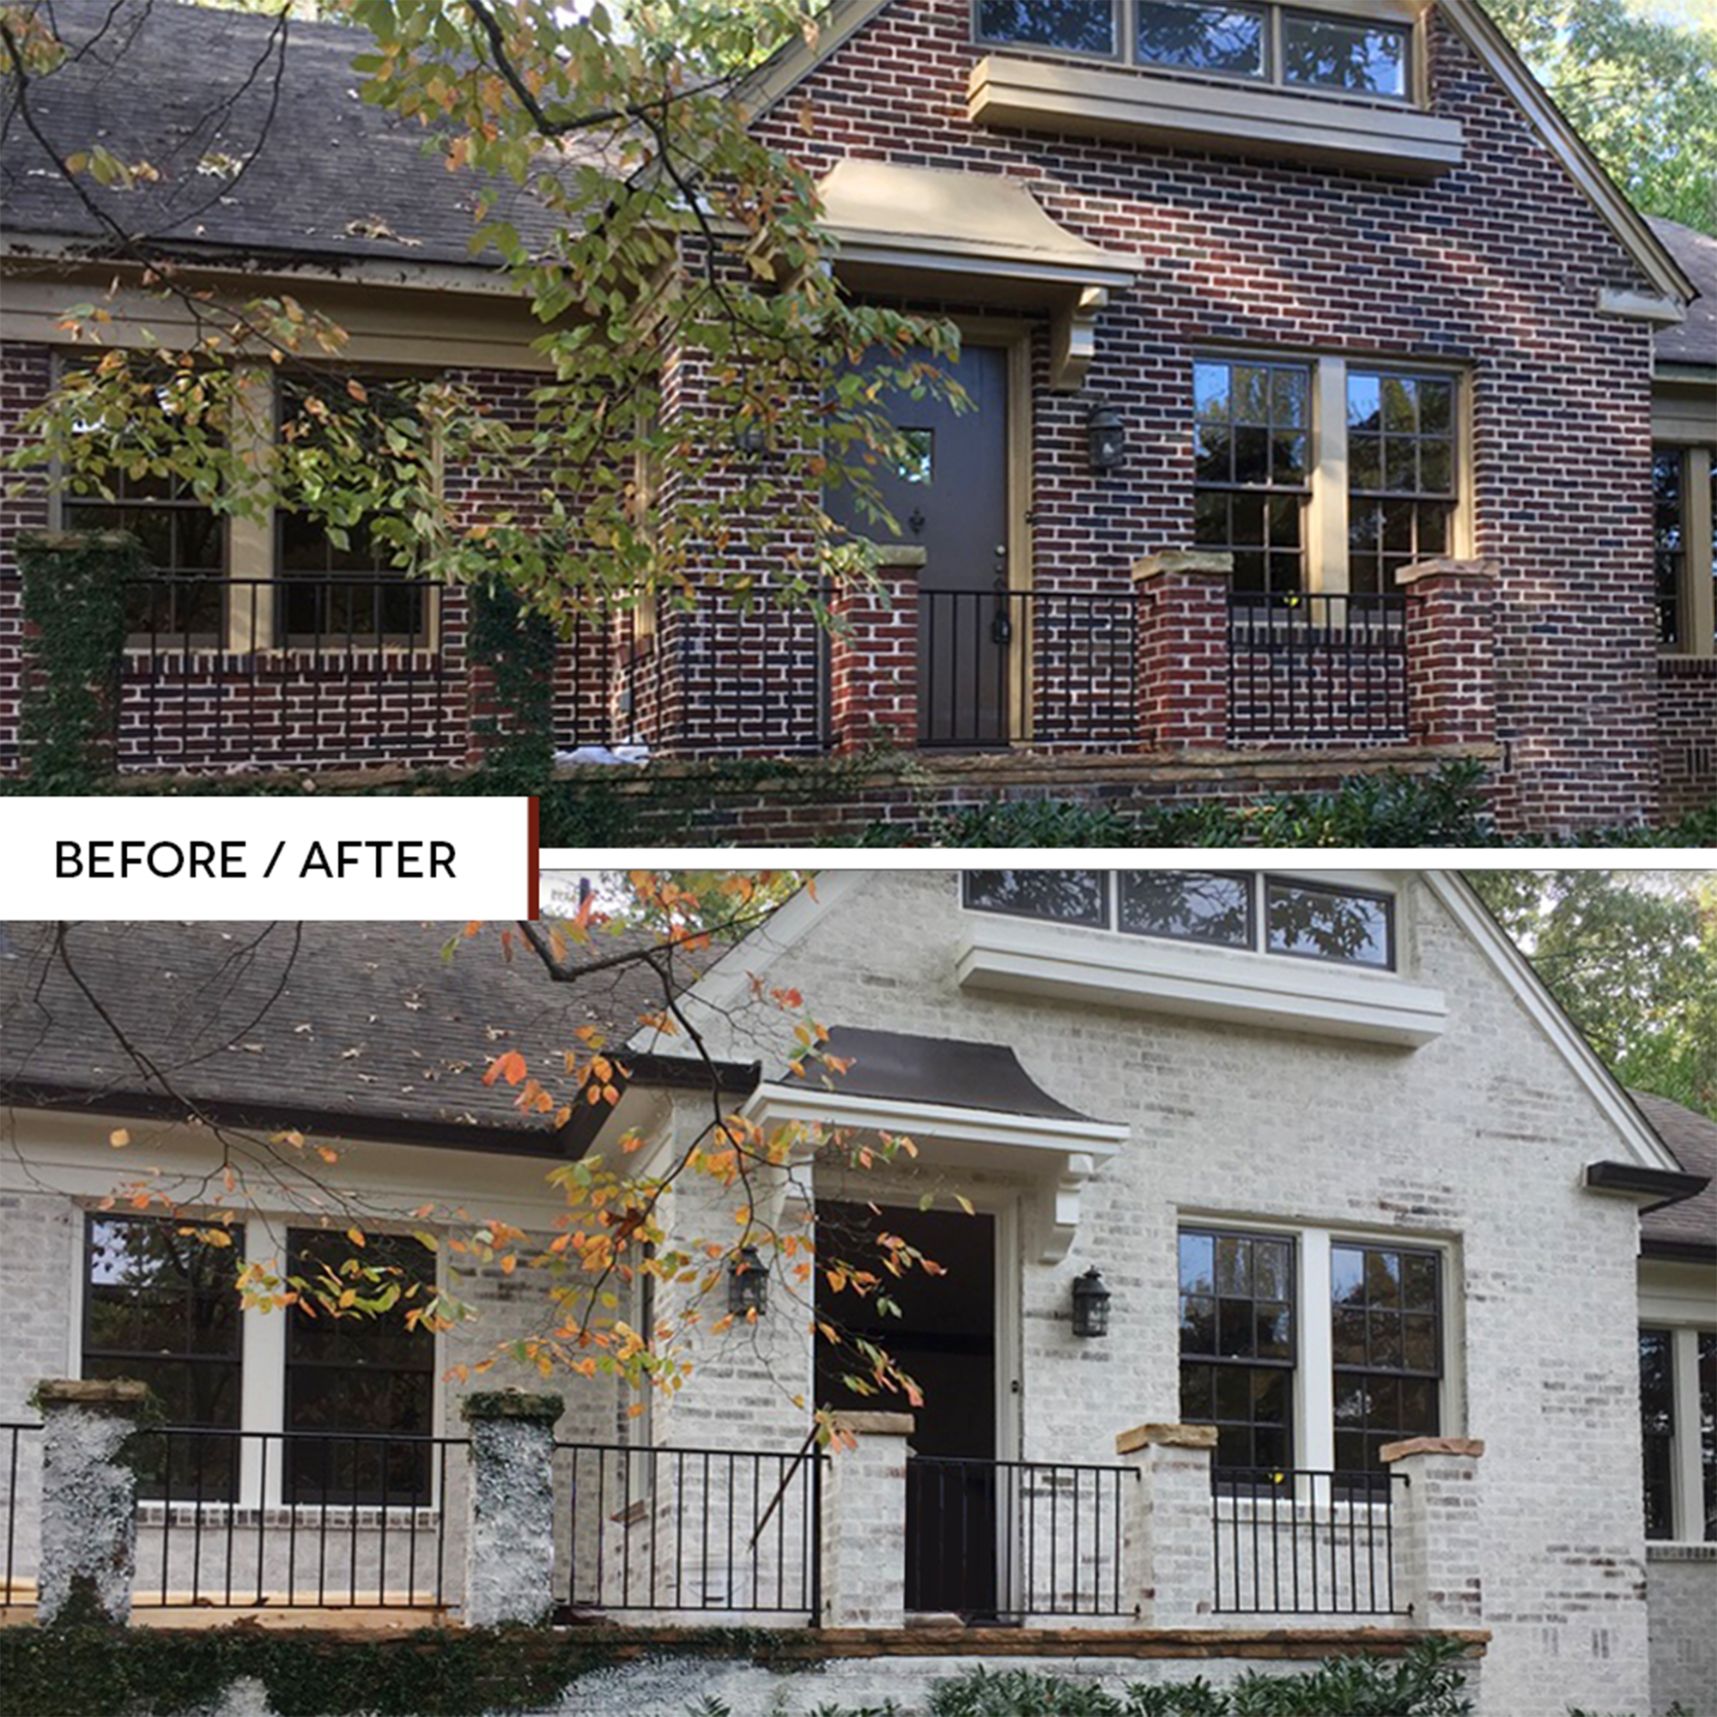 Limewashed finish on a brick Tudor home, before and after